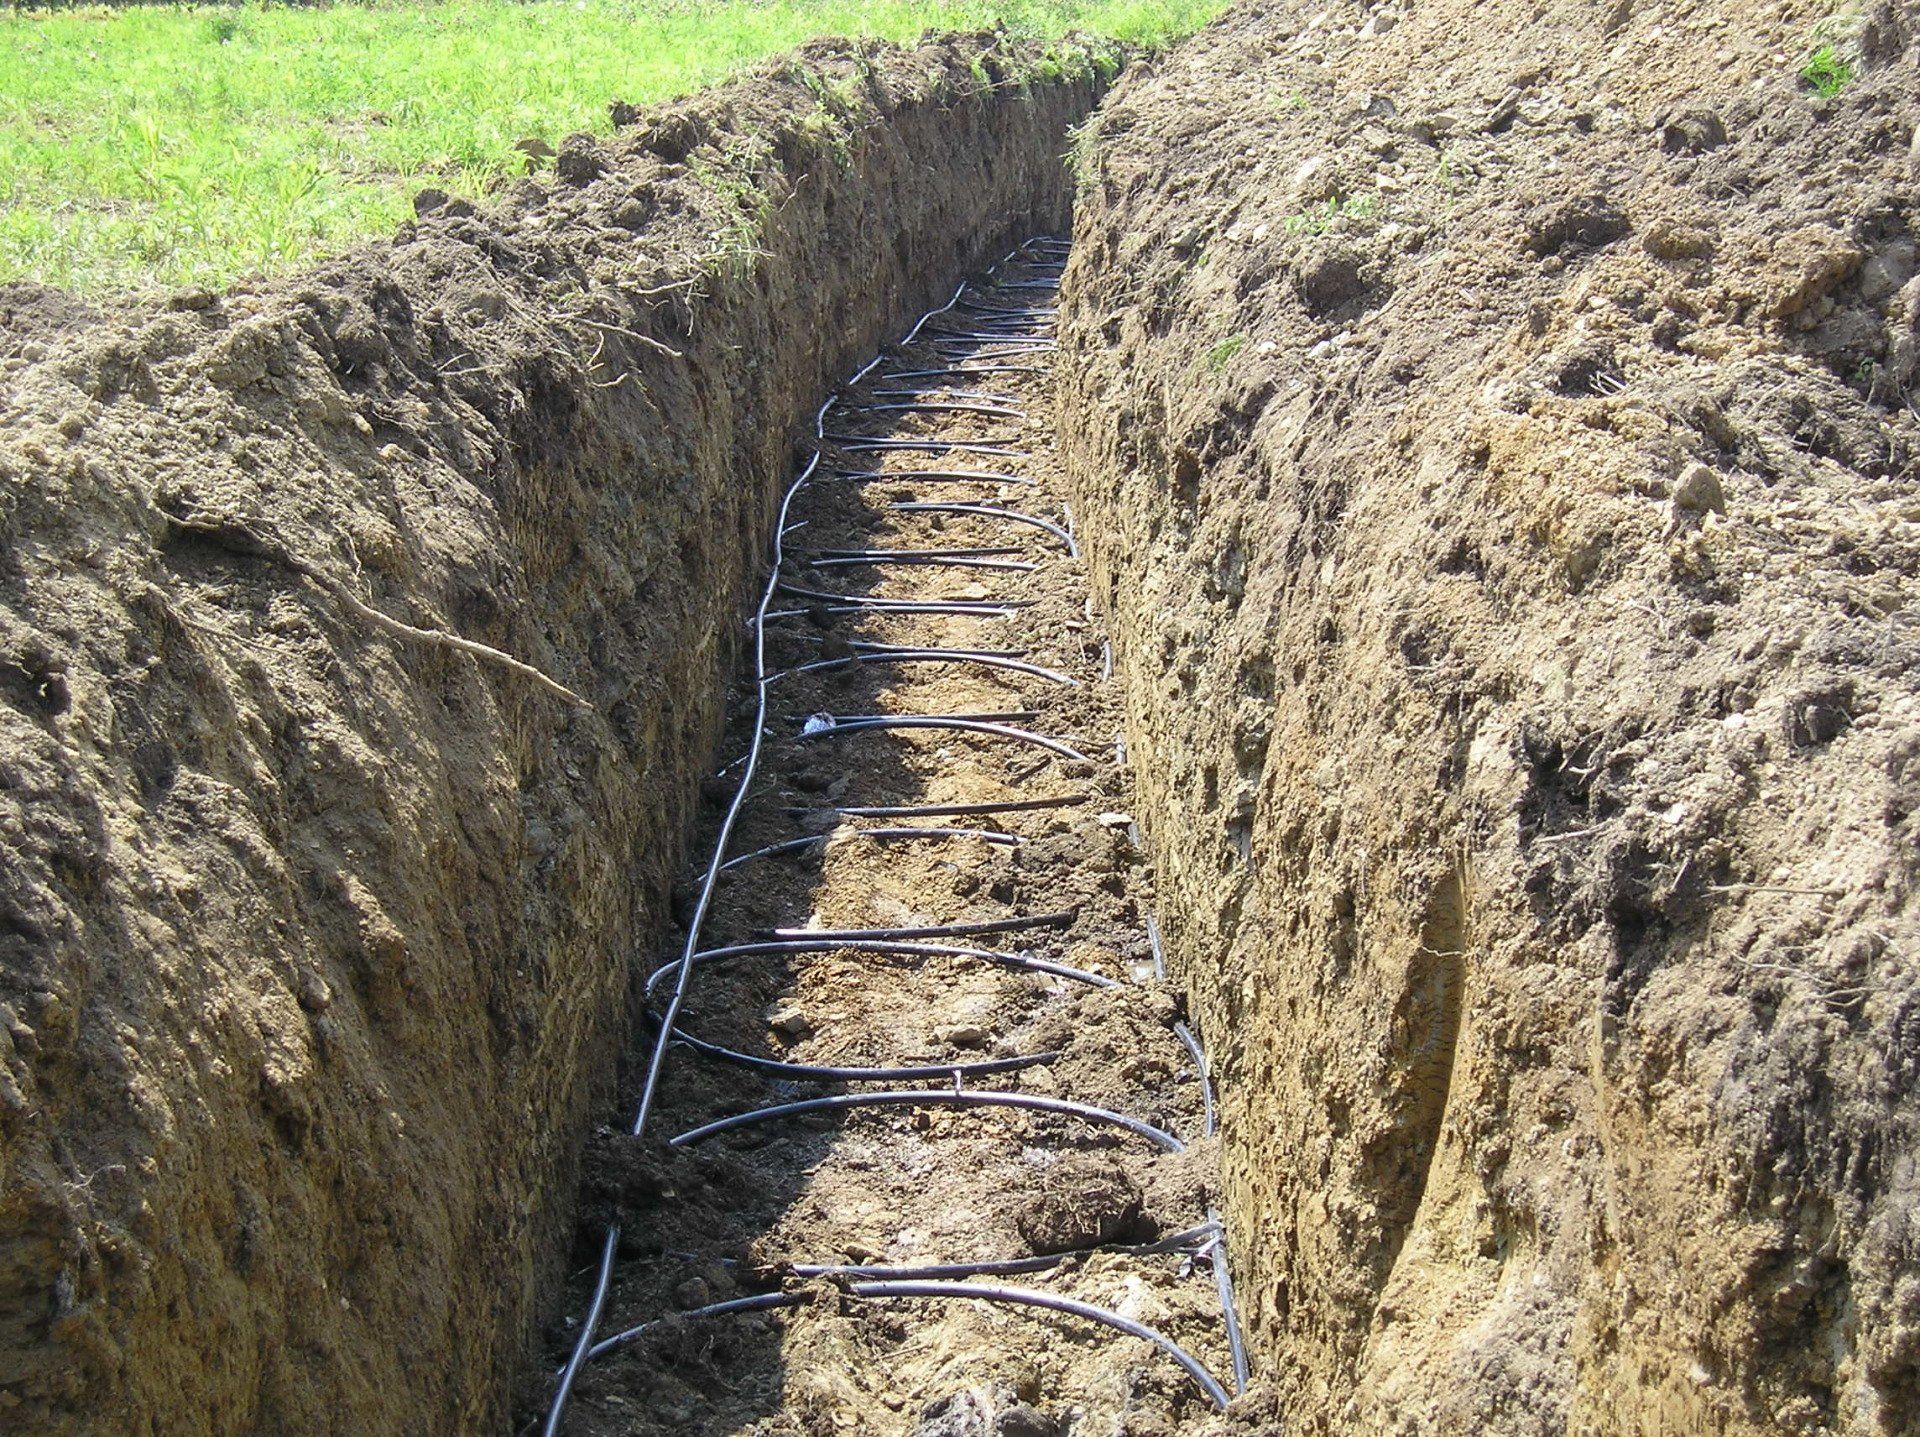 View of ground trench with wire laid on the base